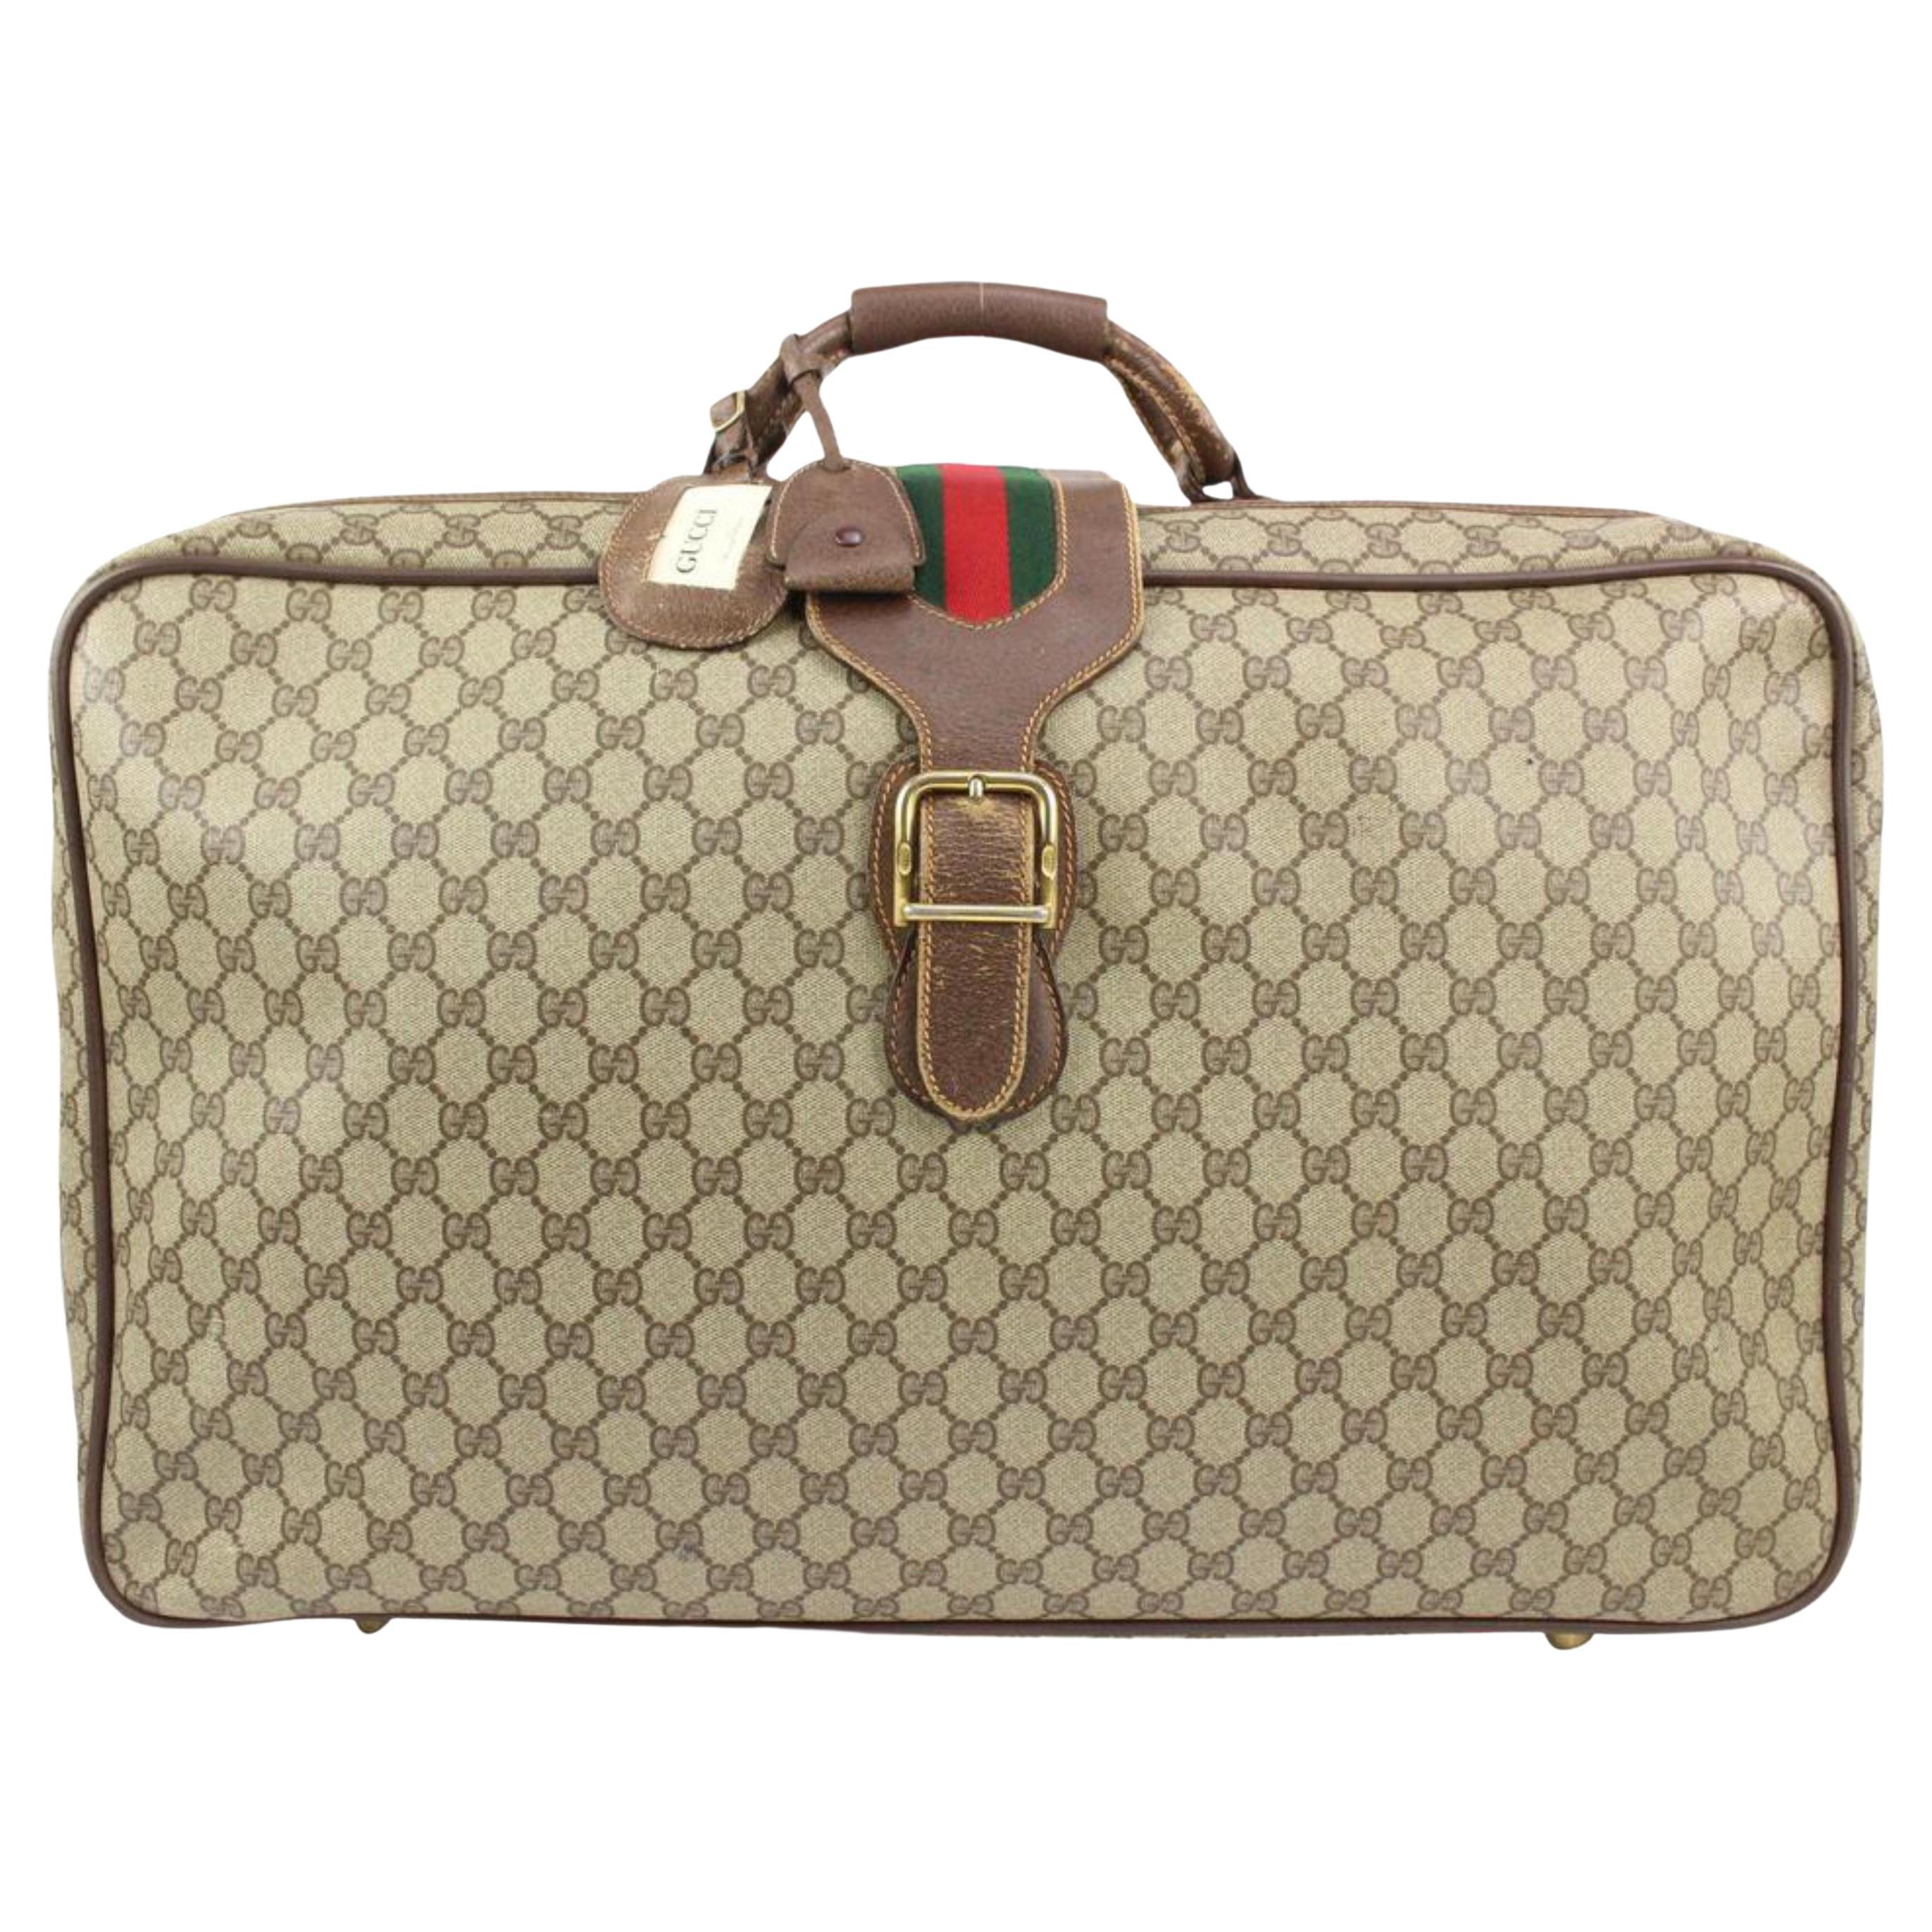 Gucci XL Supreme GG Web Suitcase Soft Trunk Luggage s210g66 For Sale